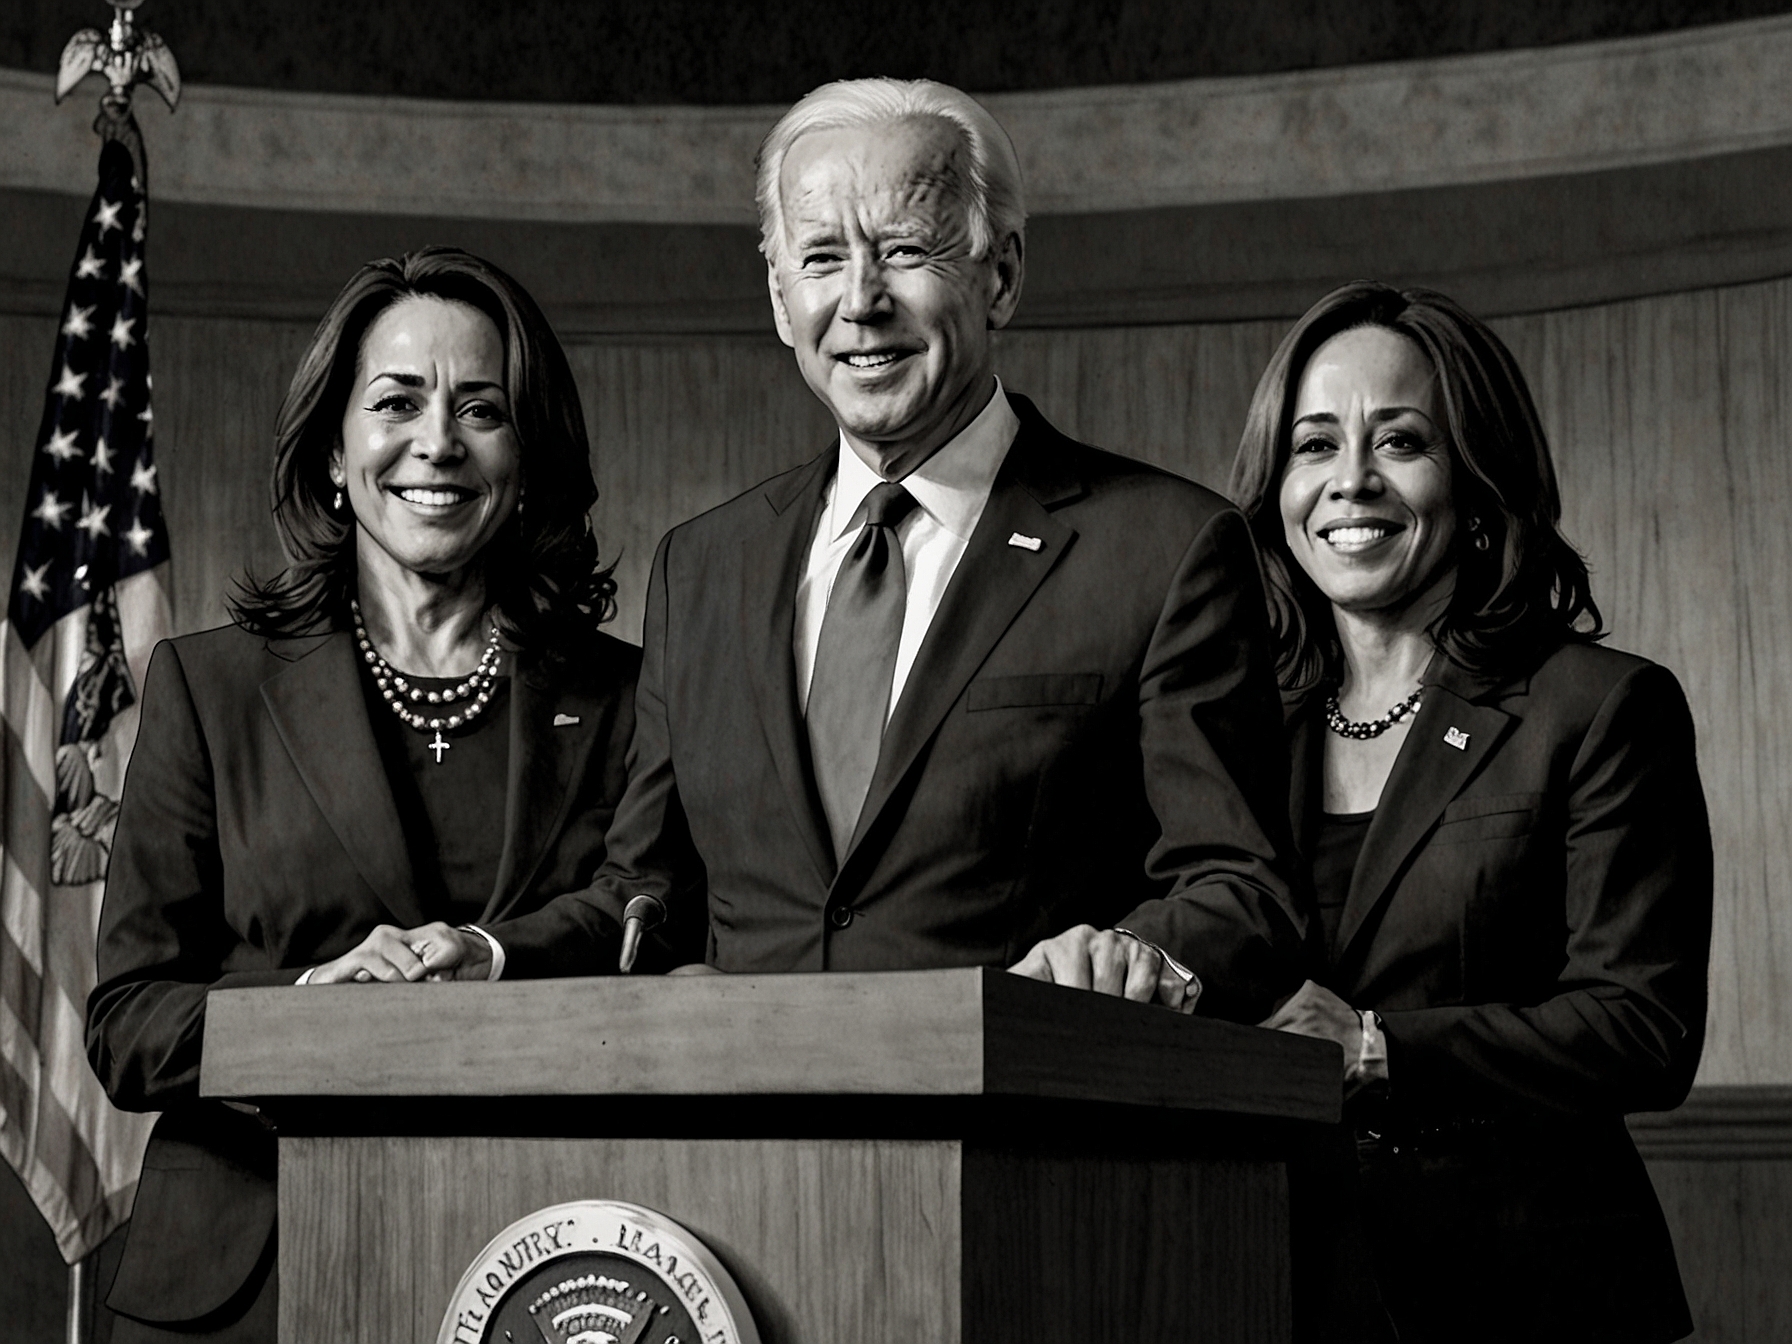 President Joe Biden speaks at a podium with Vice President Kamala Harris and former President Barack Obama at an event in Los Angeles.